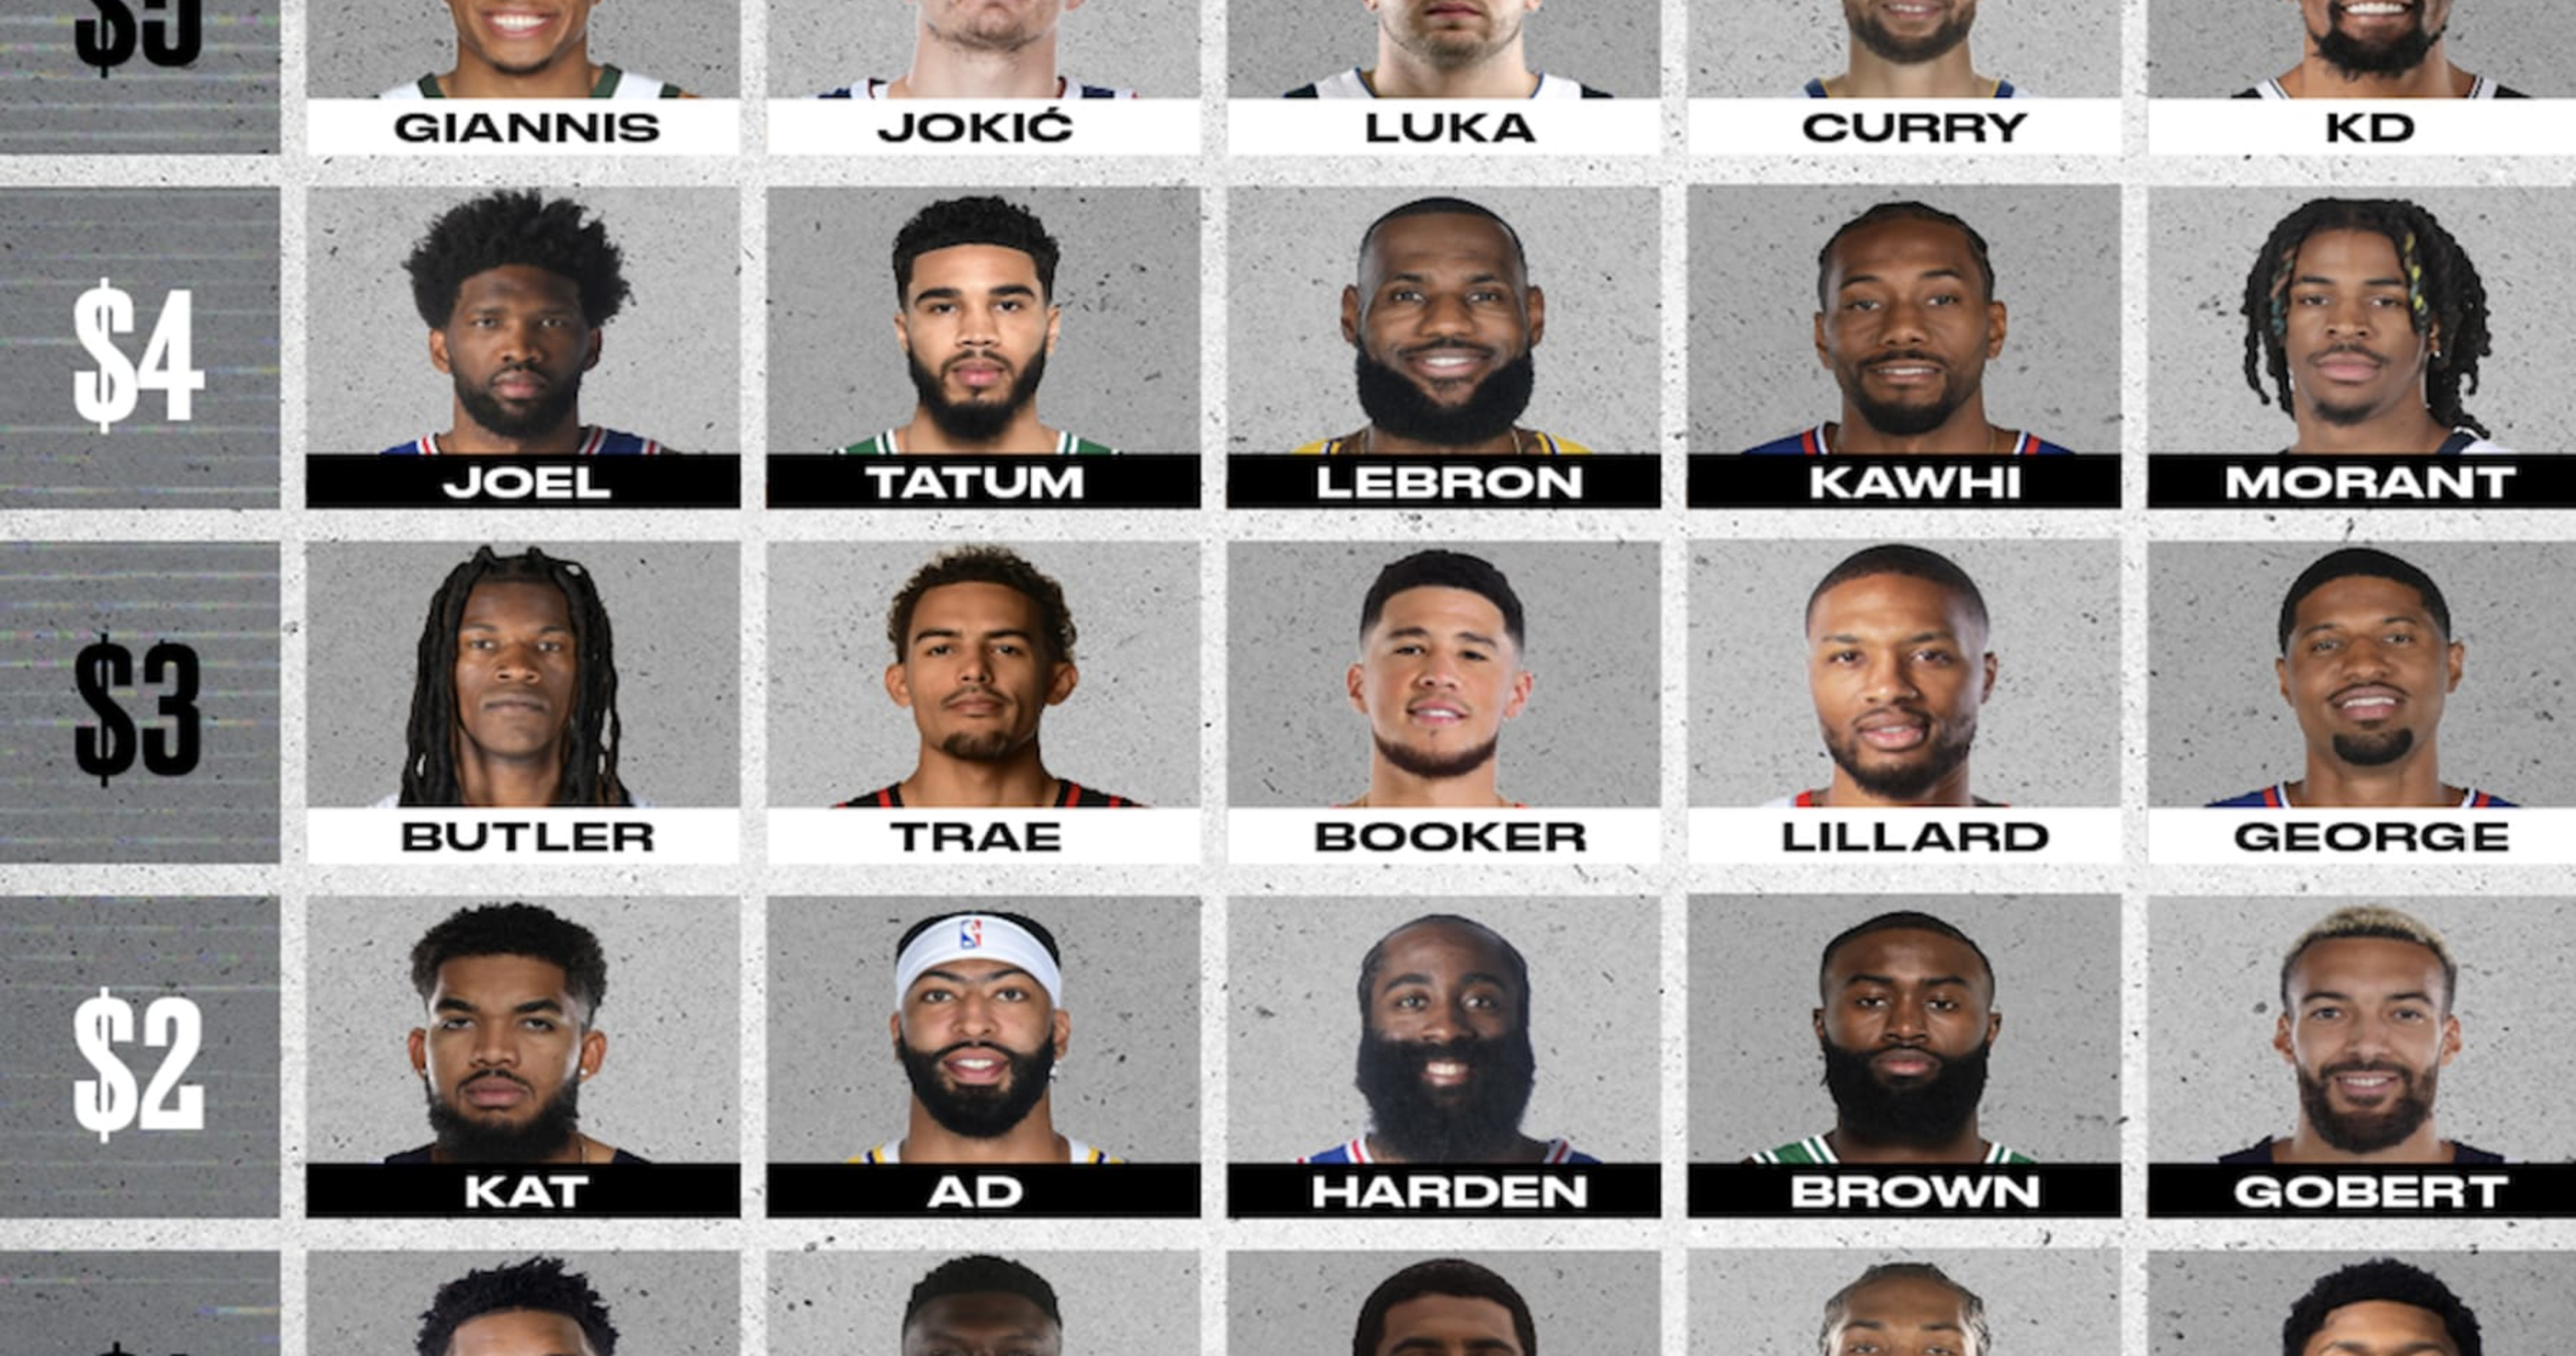 Who has the worst hair in the NBA? : r/nba